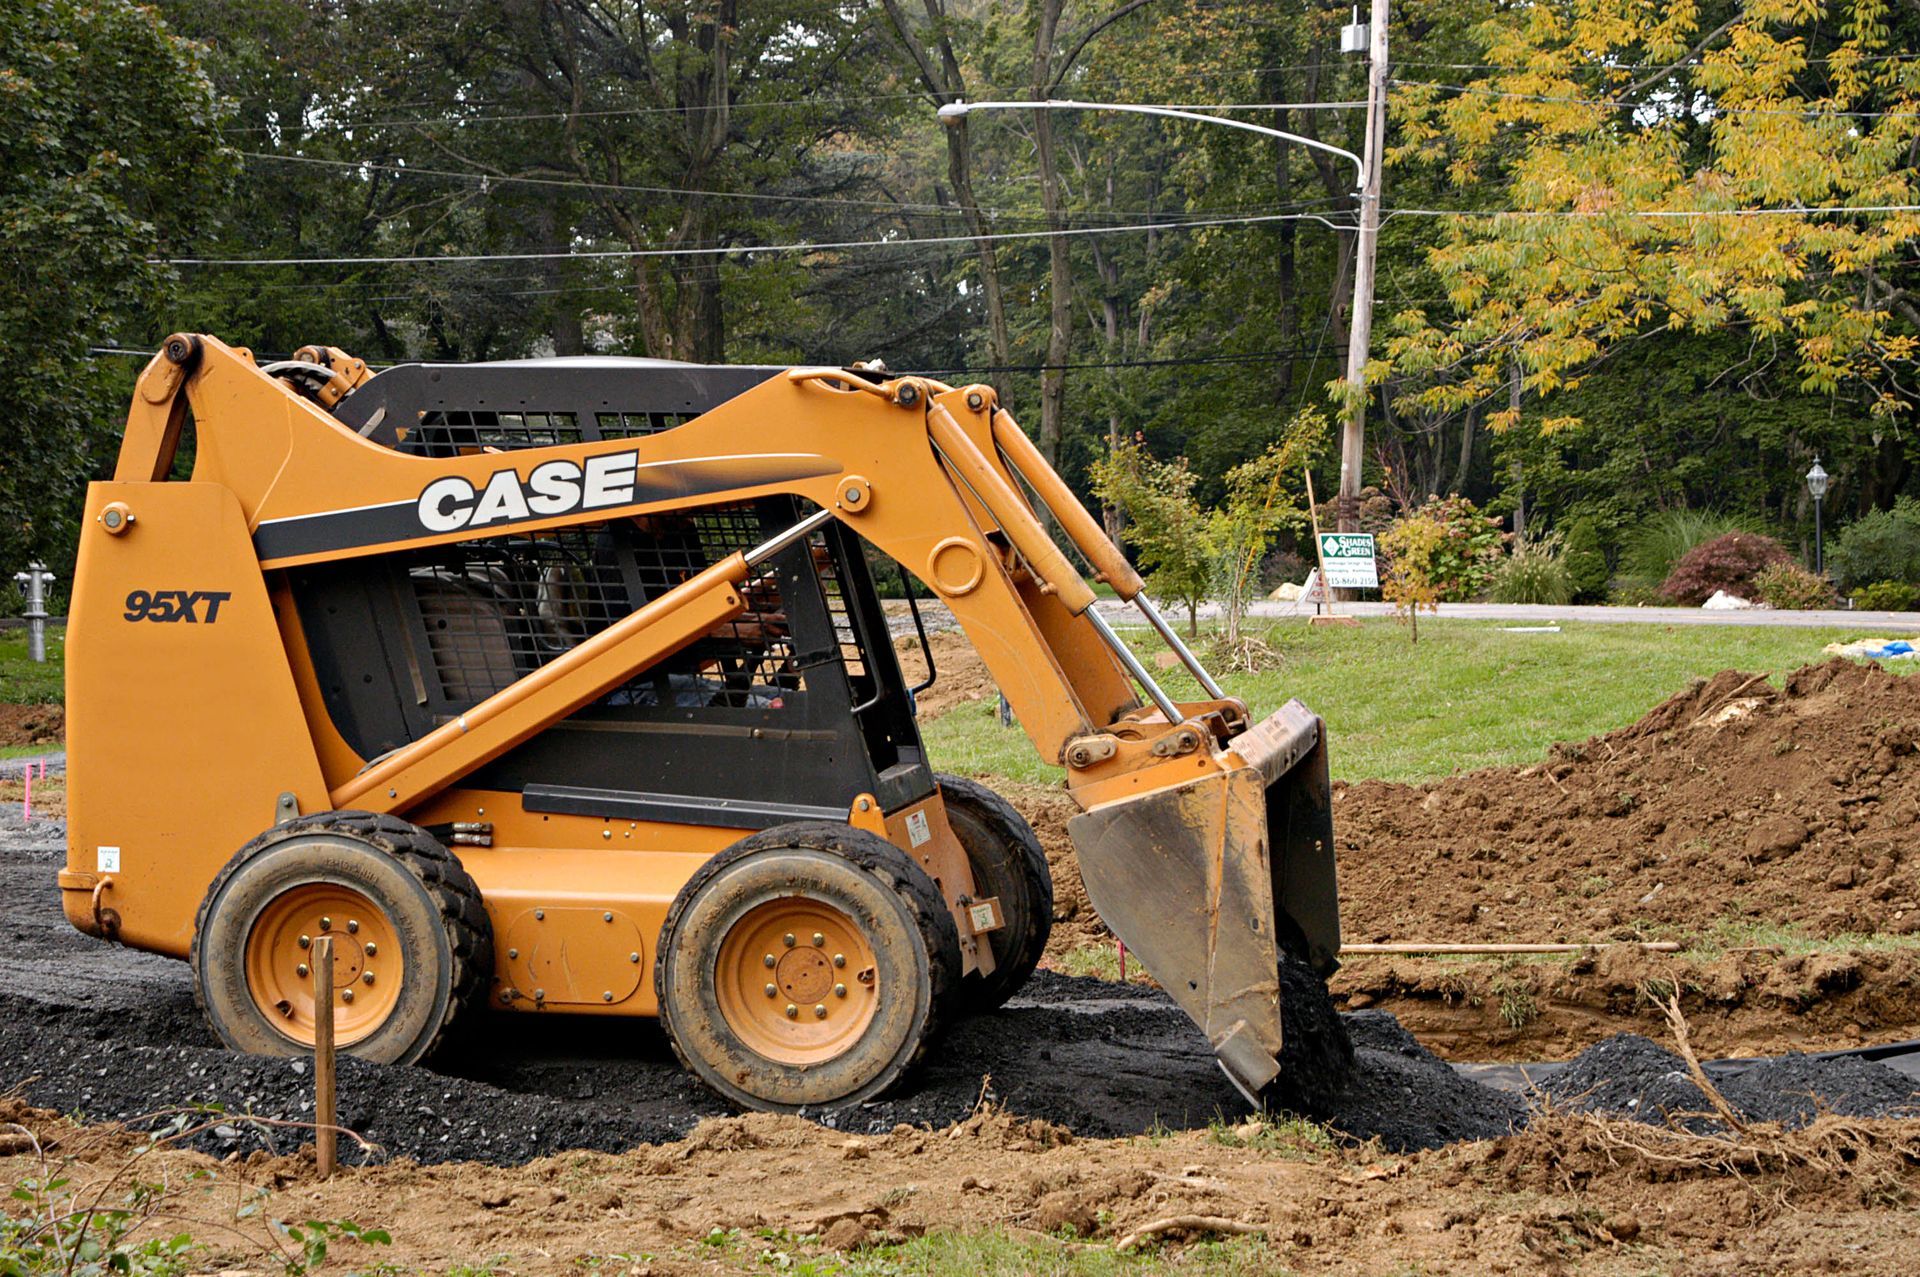 A case skid steer is digging a hole in the dirt.